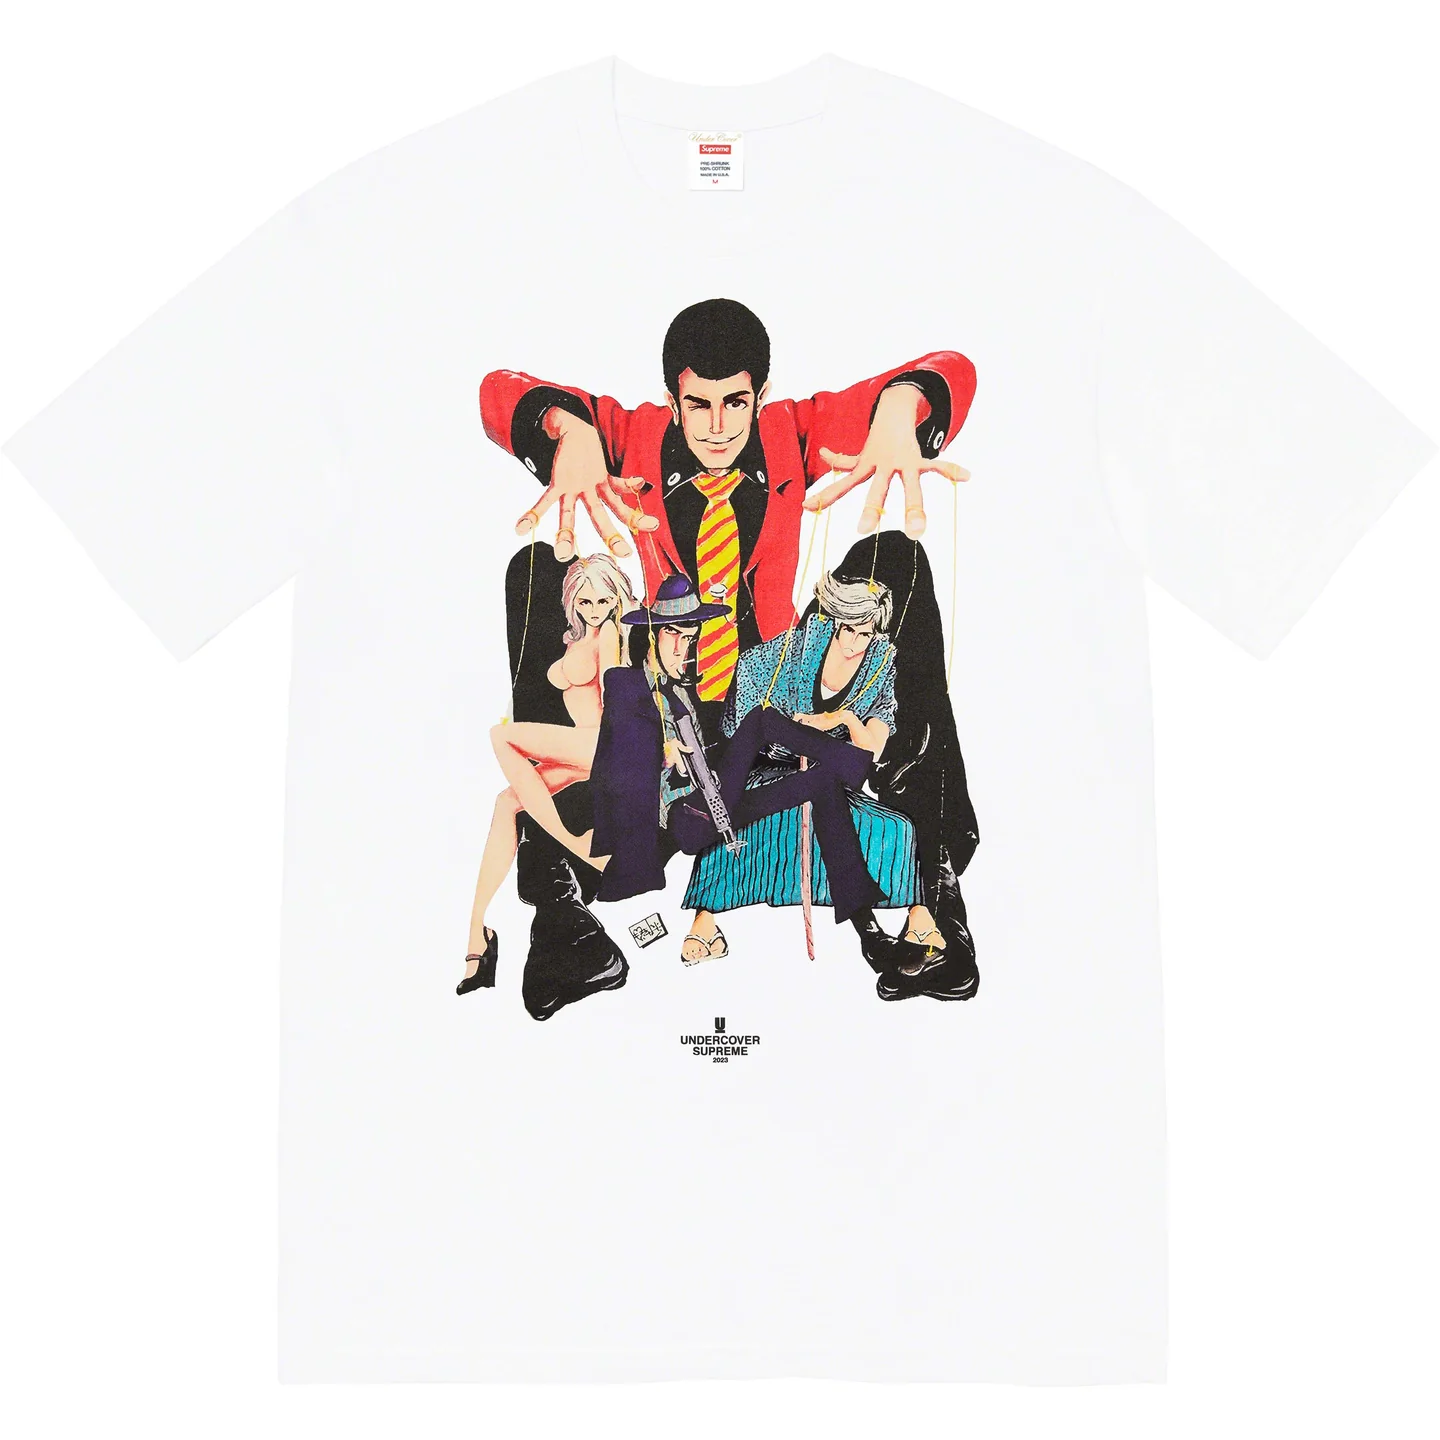 Supreme®/UNDERCOVER Lupin Tee